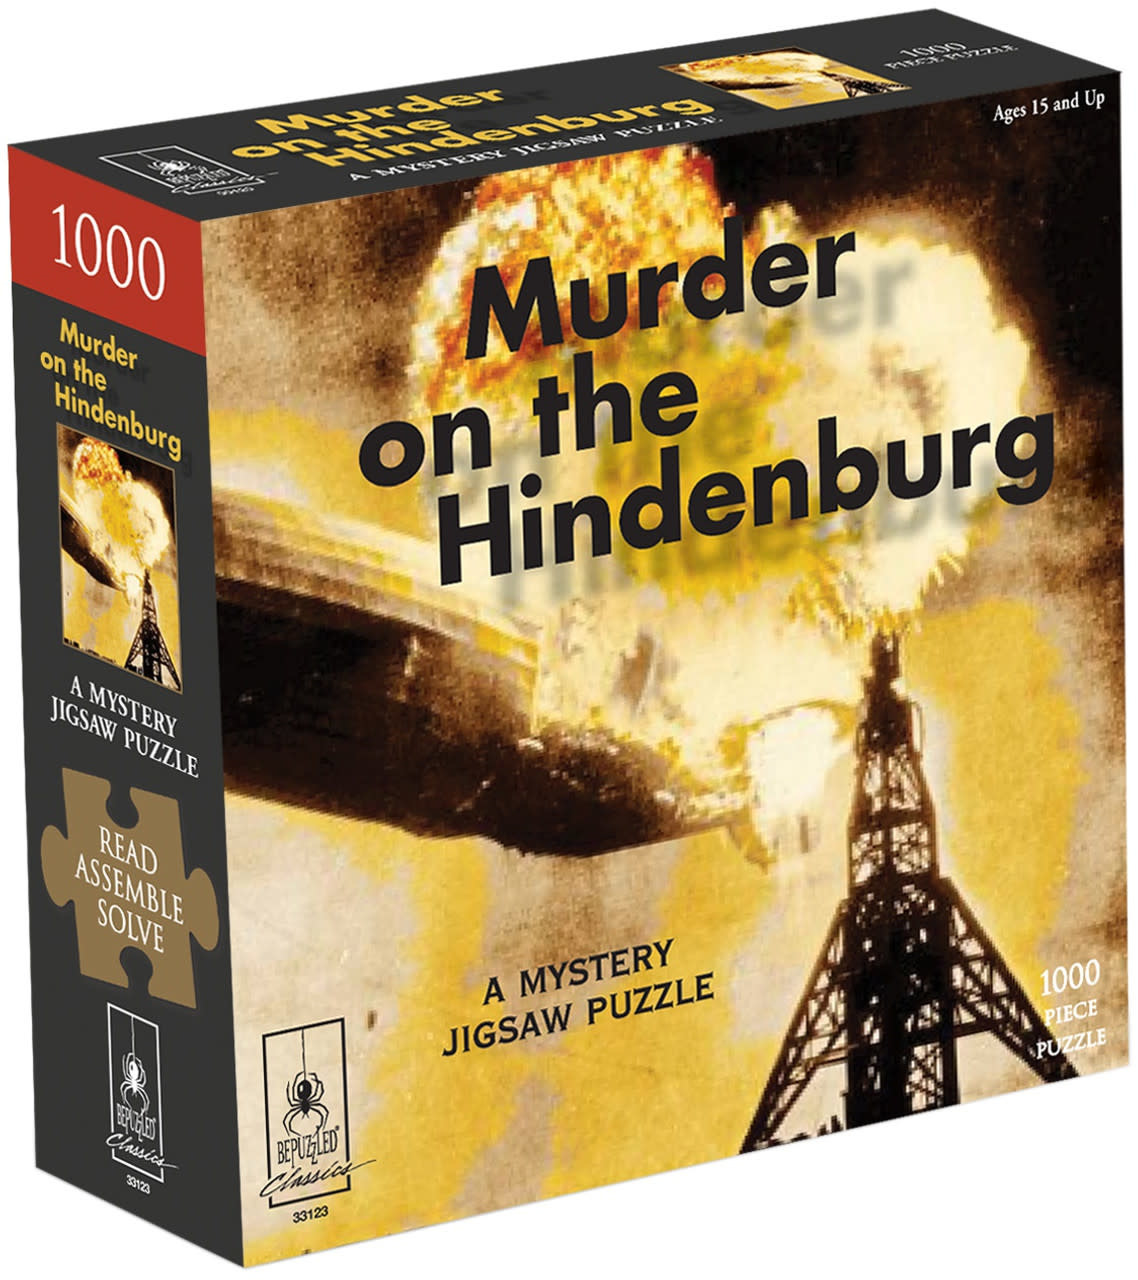 Mystery Puzzle - Murder on the Hindenburg